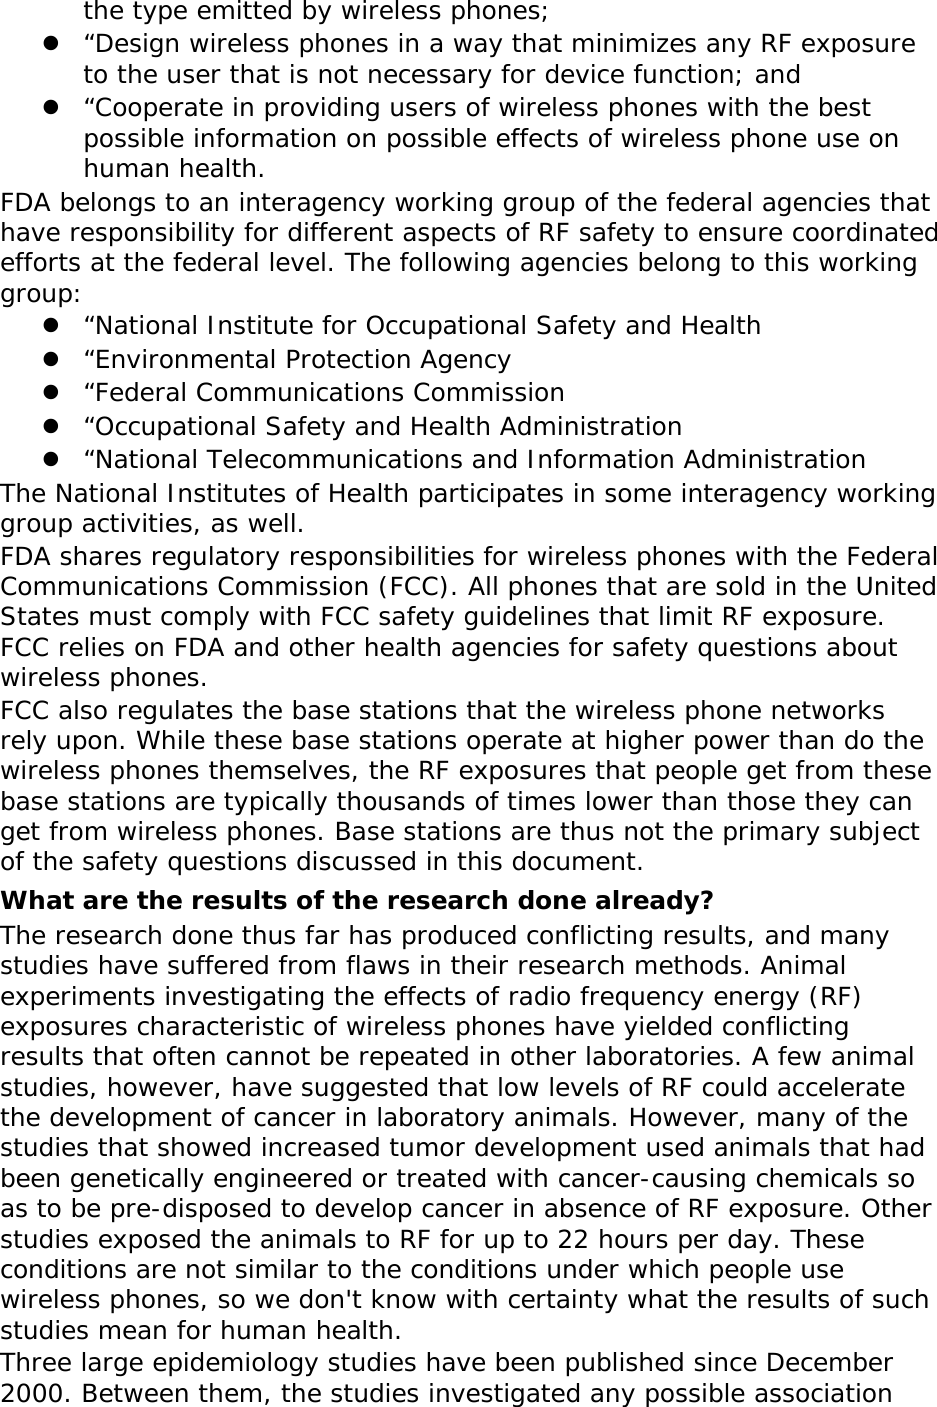 the type emitted by wireless phones; z “Design wireless phones in a way that minimizes any RF exposure to the user that is not necessary for device function; and z “Cooperate in providing users of wireless phones with the best possible information on possible effects of wireless phone use on human health. FDA belongs to an interagency working group of the federal agencies that have responsibility for different aspects of RF safety to ensure coordinated efforts at the federal level. The following agencies belong to this working group: z “National Institute for Occupational Safety and Health z “Environmental Protection Agency z “Federal Communications Commission z “Occupational Safety and Health Administration z “National Telecommunications and Information Administration The National Institutes of Health participates in some interagency working group activities, as well. FDA shares regulatory responsibilities for wireless phones with the Federal Communications Commission (FCC). All phones that are sold in the United States must comply with FCC safety guidelines that limit RF exposure. FCC relies on FDA and other health agencies for safety questions about wireless phones. FCC also regulates the base stations that the wireless phone networks rely upon. While these base stations operate at higher power than do the wireless phones themselves, the RF exposures that people get from these base stations are typically thousands of times lower than those they can get from wireless phones. Base stations are thus not the primary subject of the safety questions discussed in this document. What are the results of the research done already? The research done thus far has produced conflicting results, and many studies have suffered from flaws in their research methods. Animal experiments investigating the effects of radio frequency energy (RF) exposures characteristic of wireless phones have yielded conflicting results that often cannot be repeated in other laboratories. A few animal studies, however, have suggested that low levels of RF could accelerate the development of cancer in laboratory animals. However, many of the studies that showed increased tumor development used animals that had been genetically engineered or treated with cancer-causing chemicals so as to be pre-disposed to develop cancer in absence of RF exposure. Other studies exposed the animals to RF for up to 22 hours per day. These conditions are not similar to the conditions under which people use wireless phones, so we don&apos;t know with certainty what the results of such studies mean for human health. Three large epidemiology studies have been published since December 2000. Between them, the studies investigated any possible association 